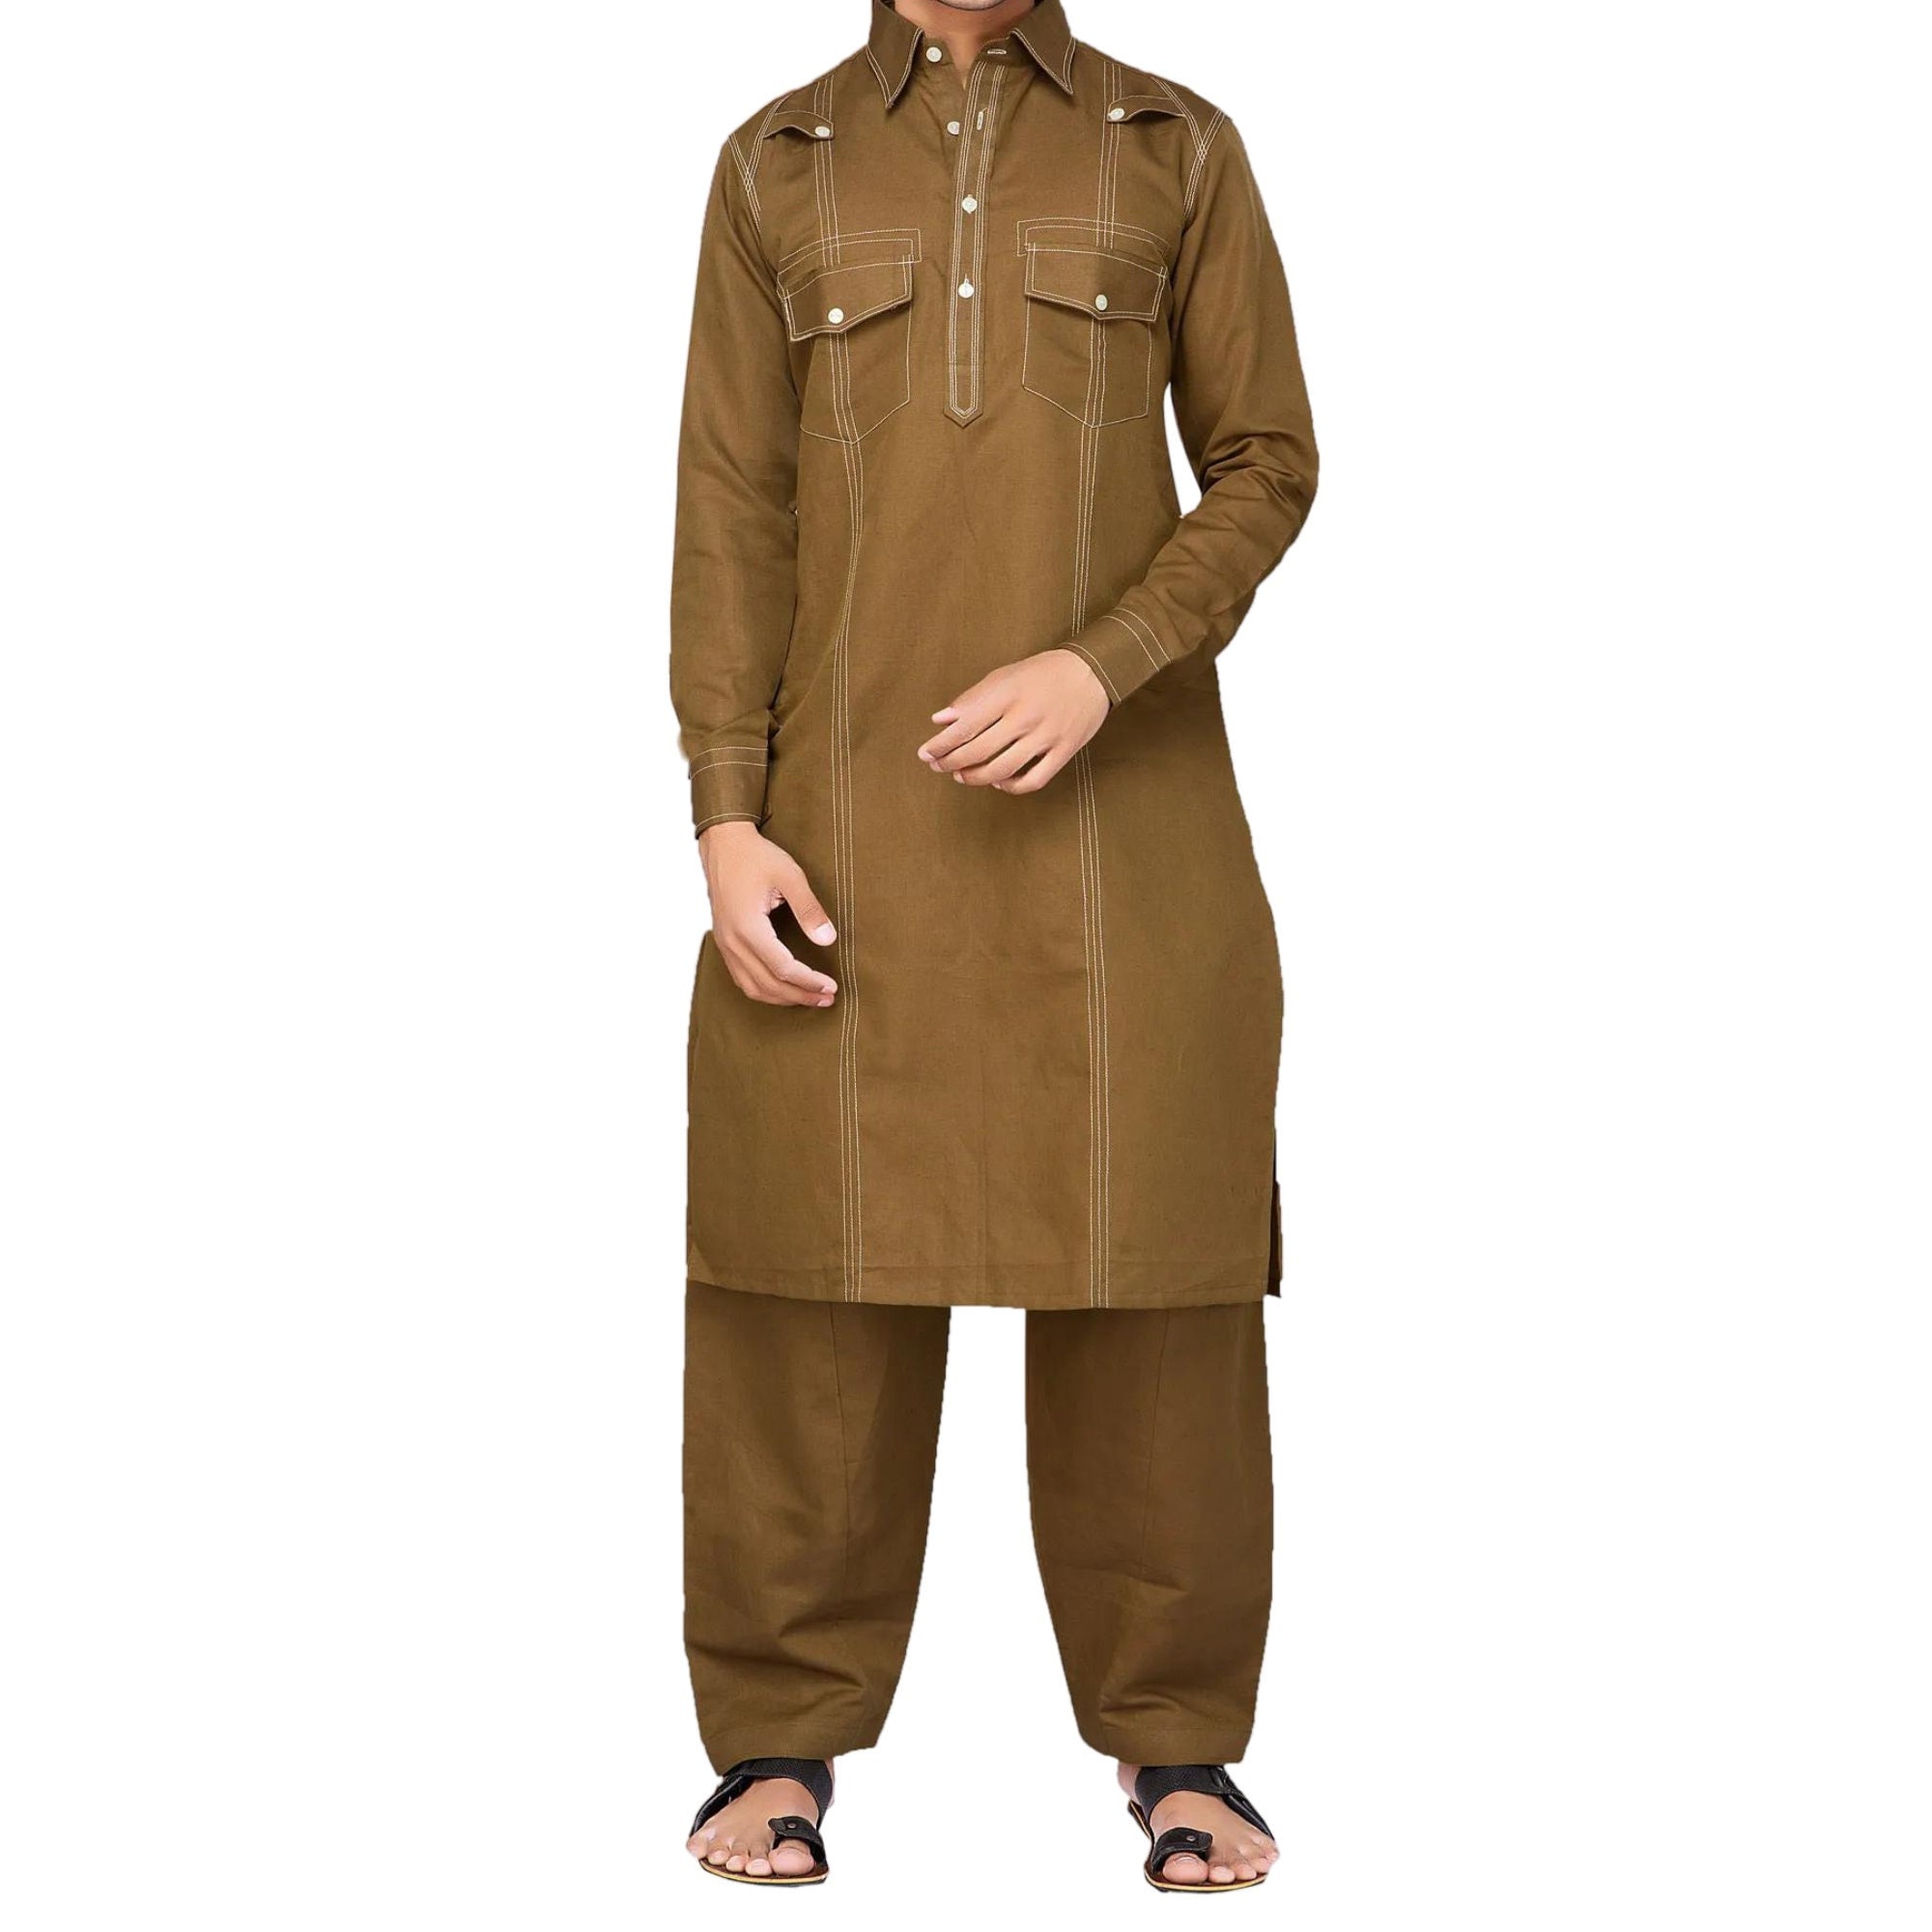 Buy Latest Pathani Suit For Men Online in New Zealand at G3fashion